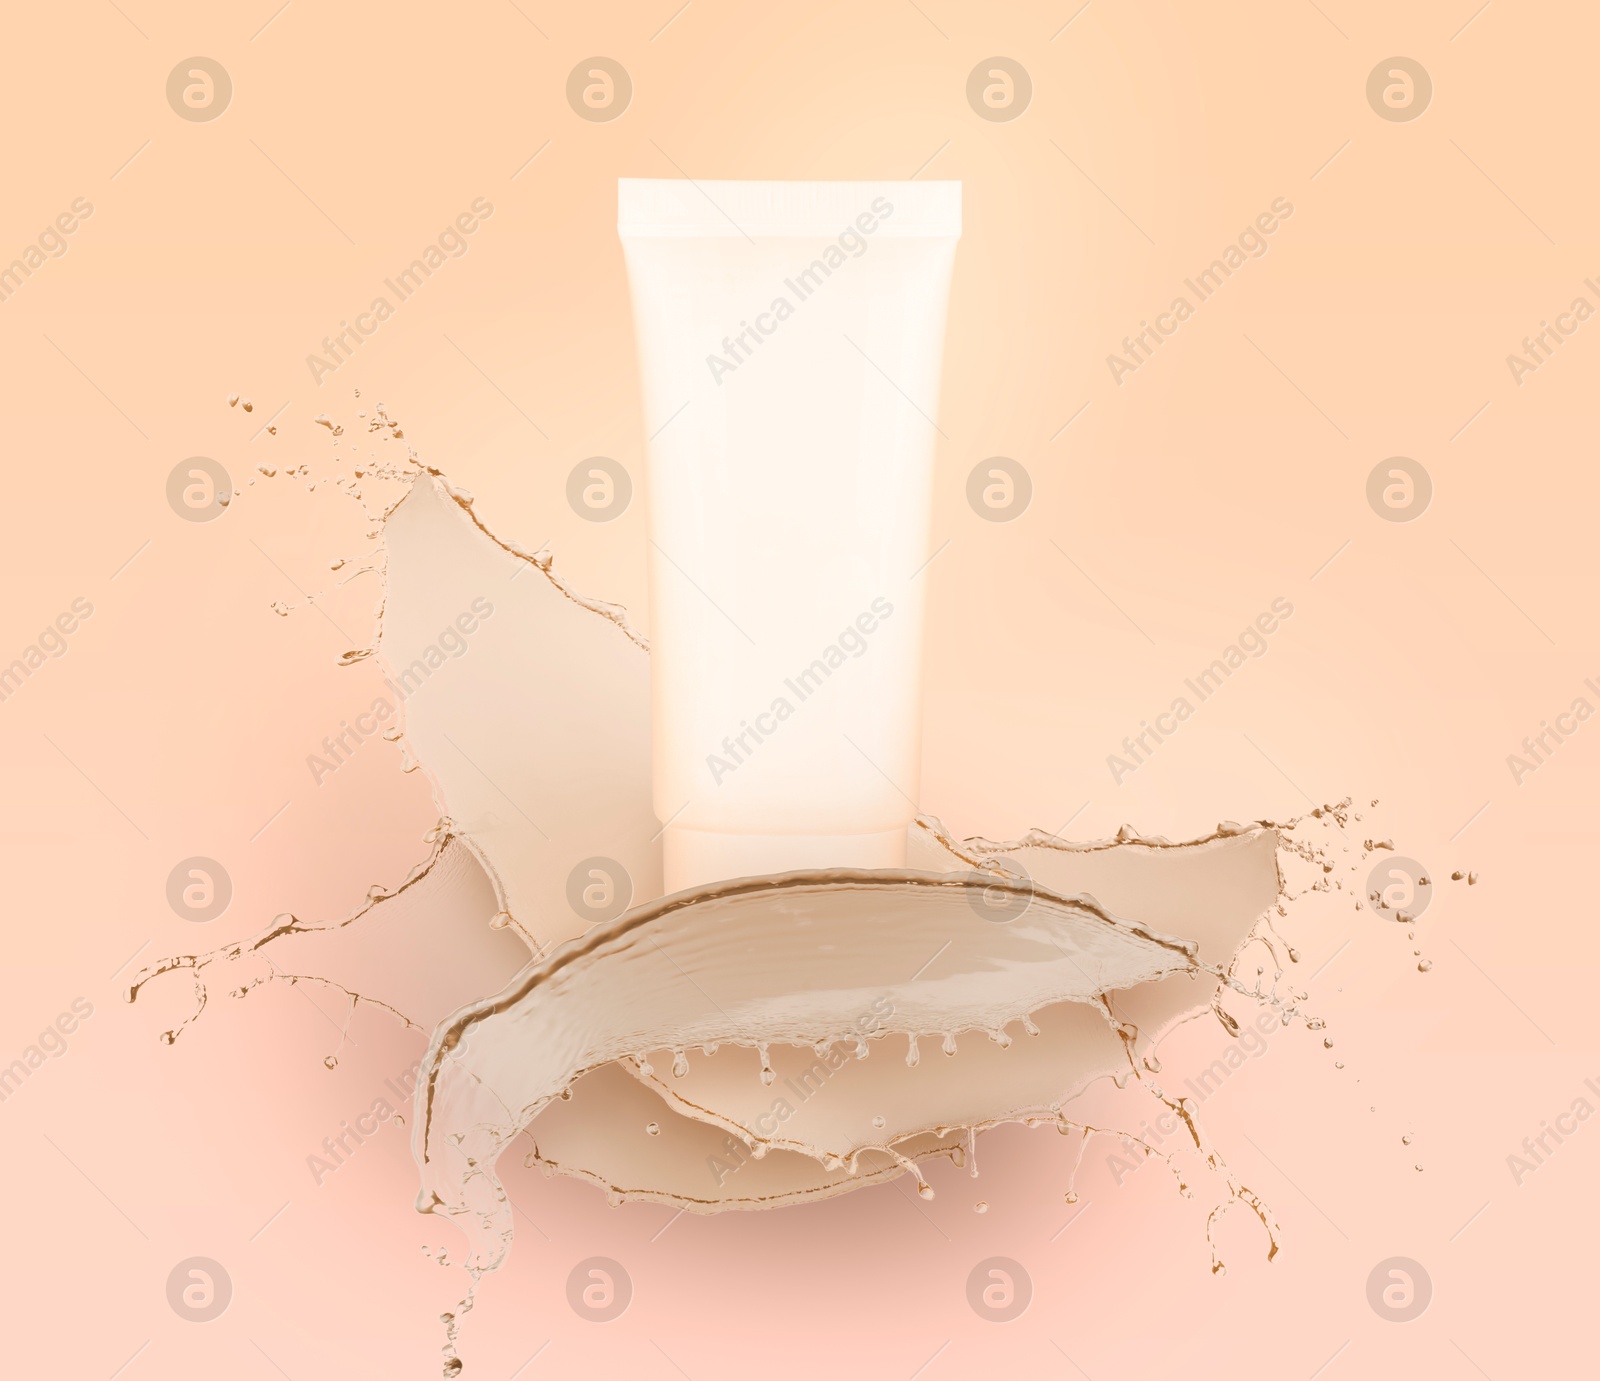 Image of Splashes of cosmetic product and tube with space for design on beige background